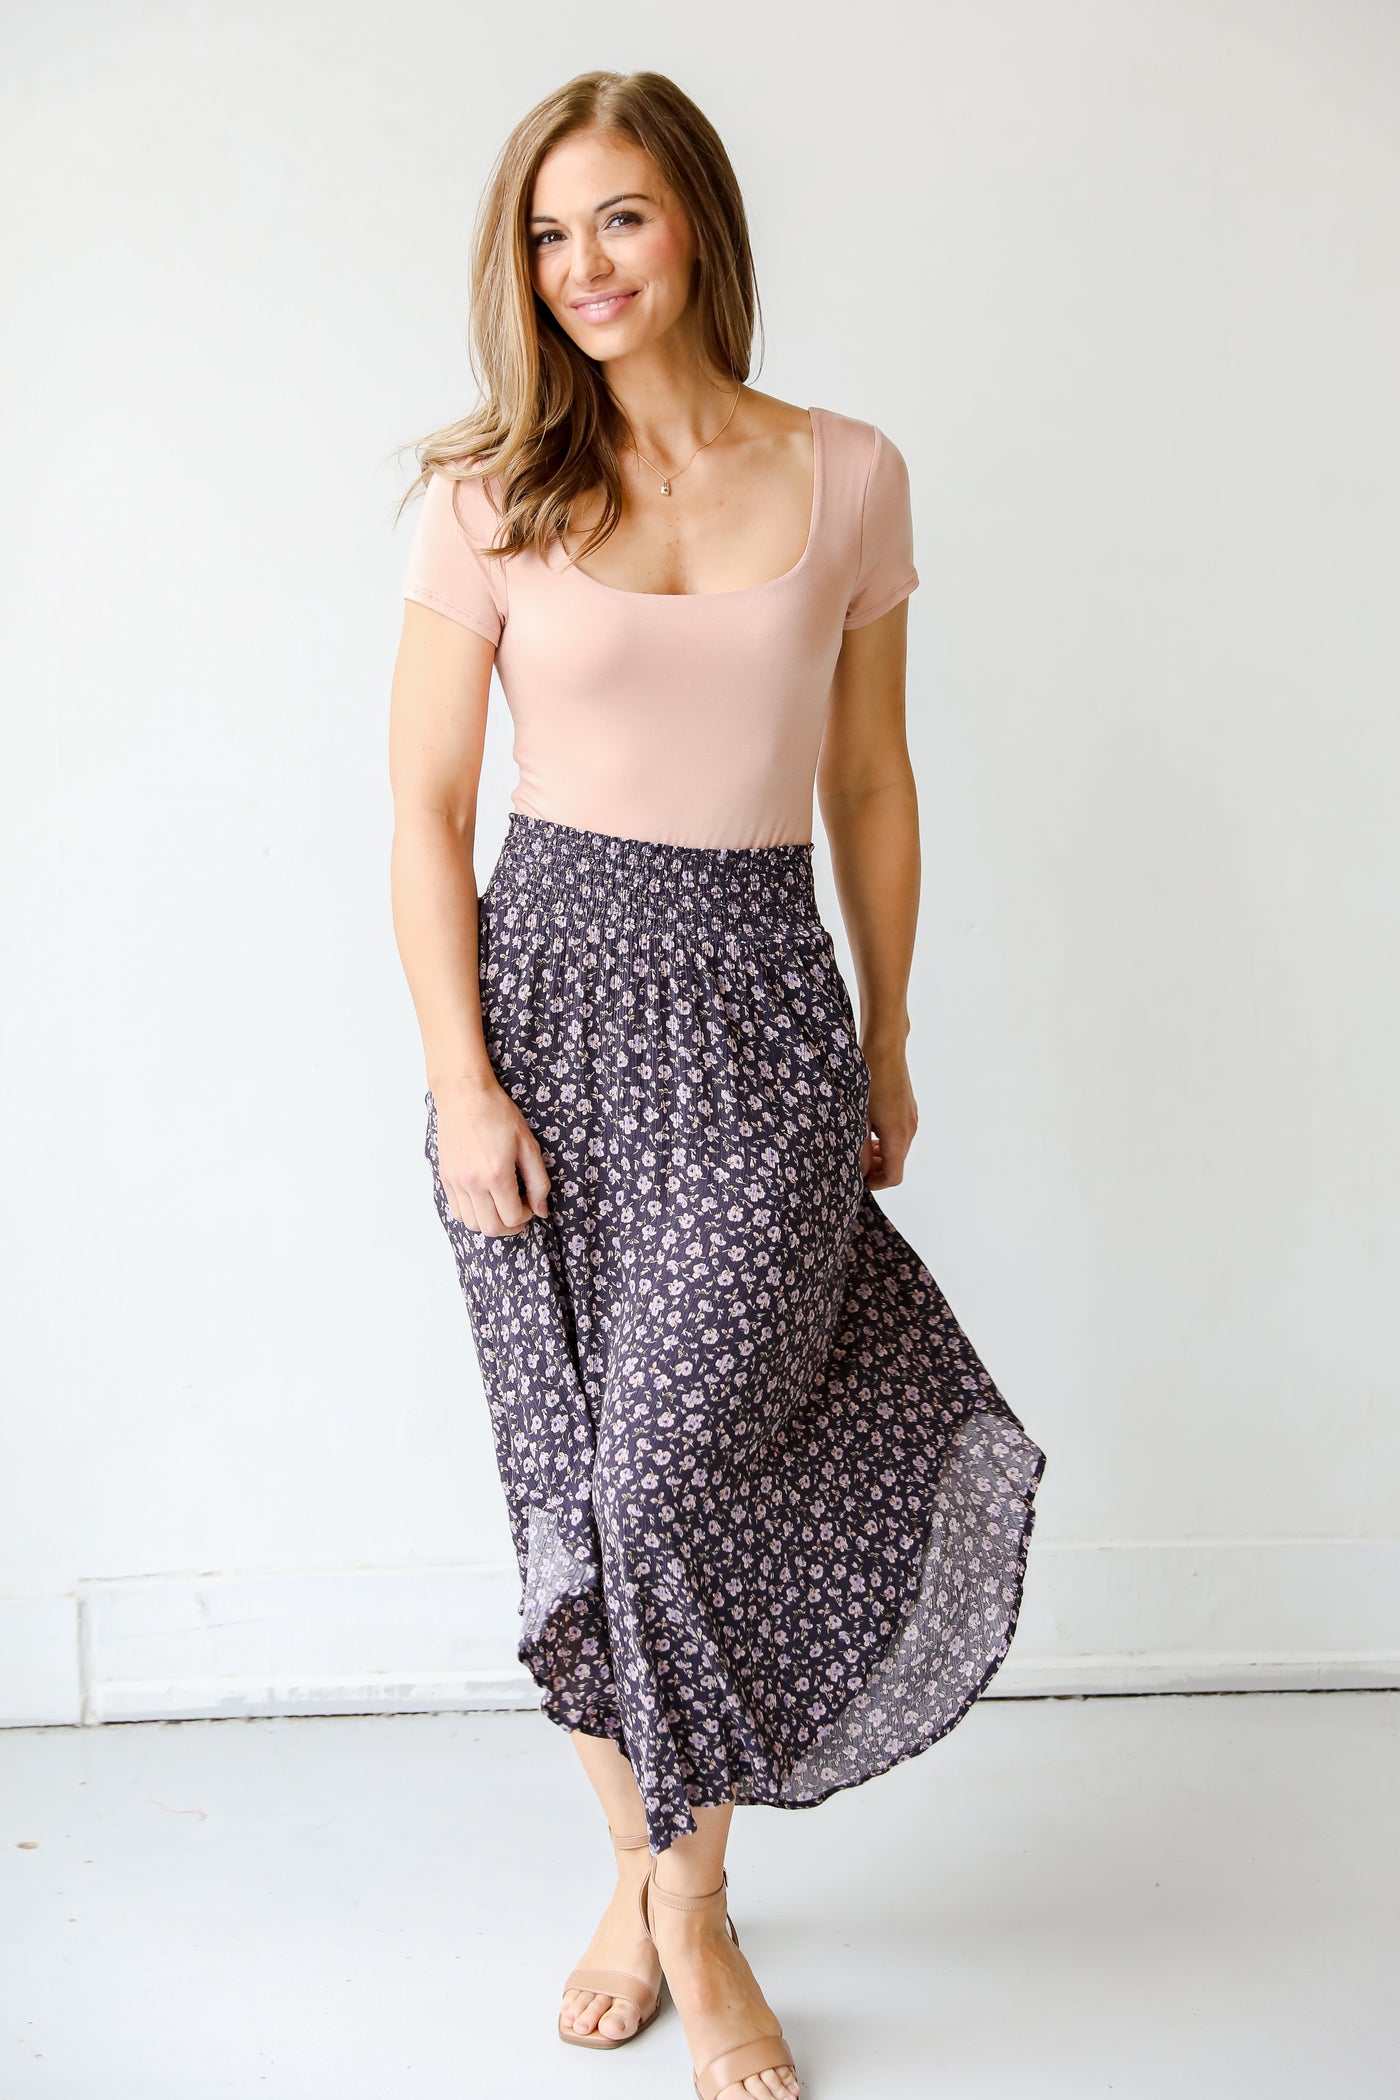 Floral Midi Skirt from dress up